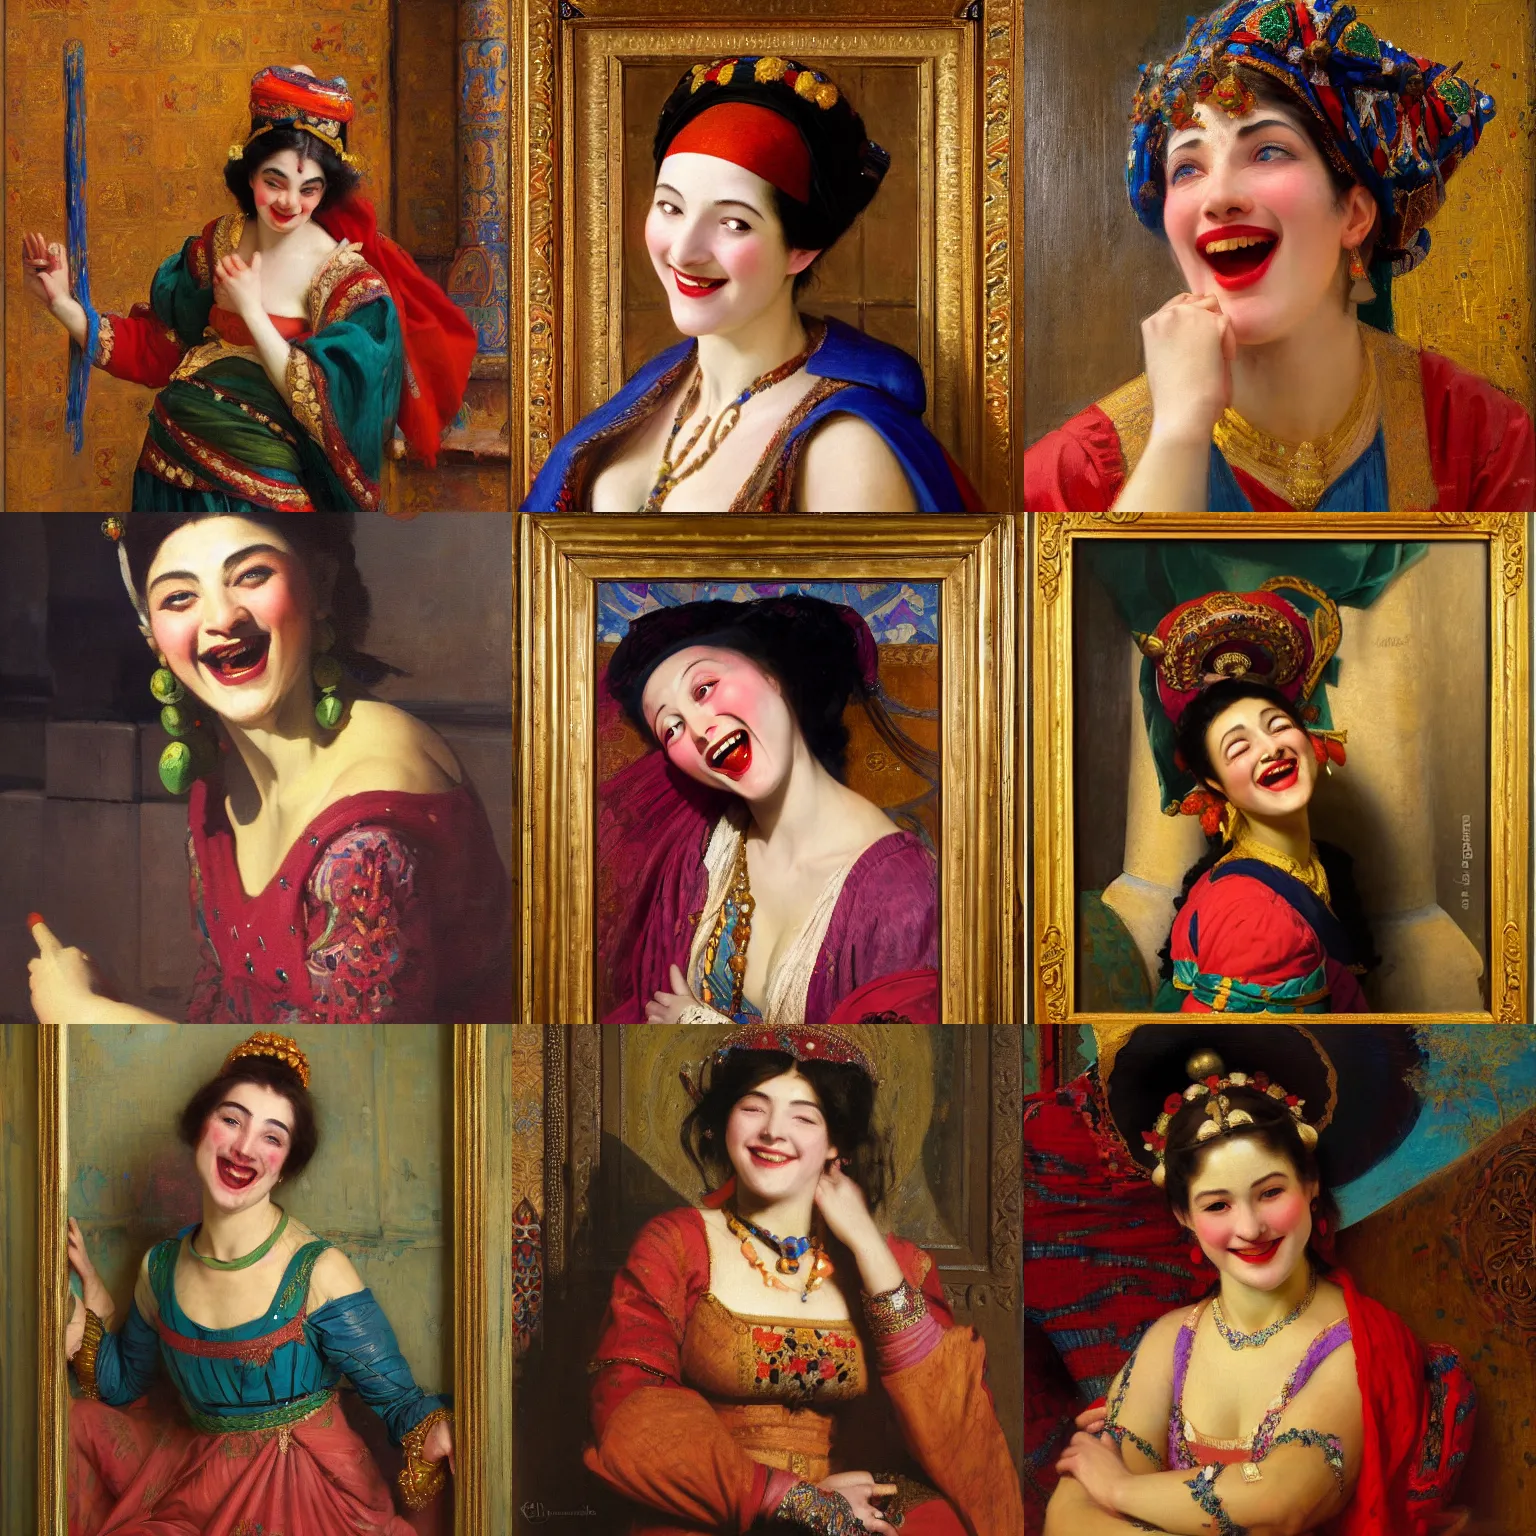 Prompt: orientalism painting of a laughing beautiful female jester by edwin longsden long and theodore ralli and nasreddine dinet and adam styka, masterful intricate art. oil on canvas, excellent lighting, high detail 8 k